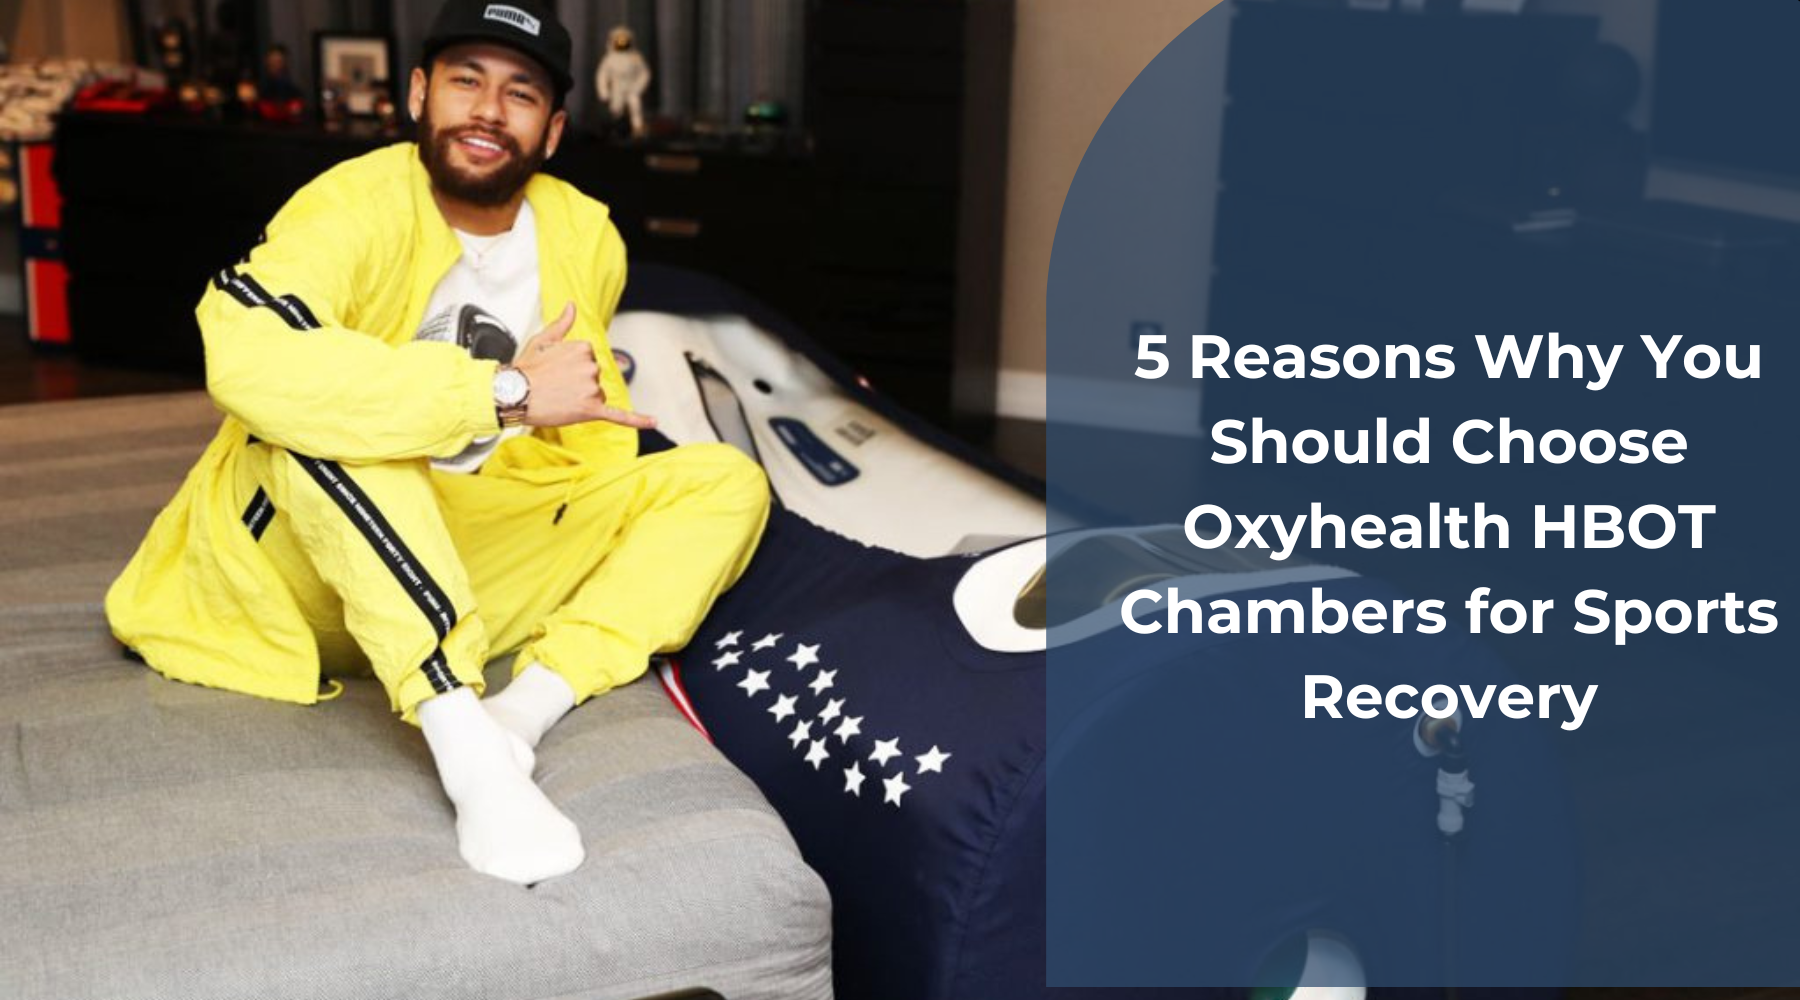 5 Reasons to Choose Oxyhealth Chambers for Sports Recovery